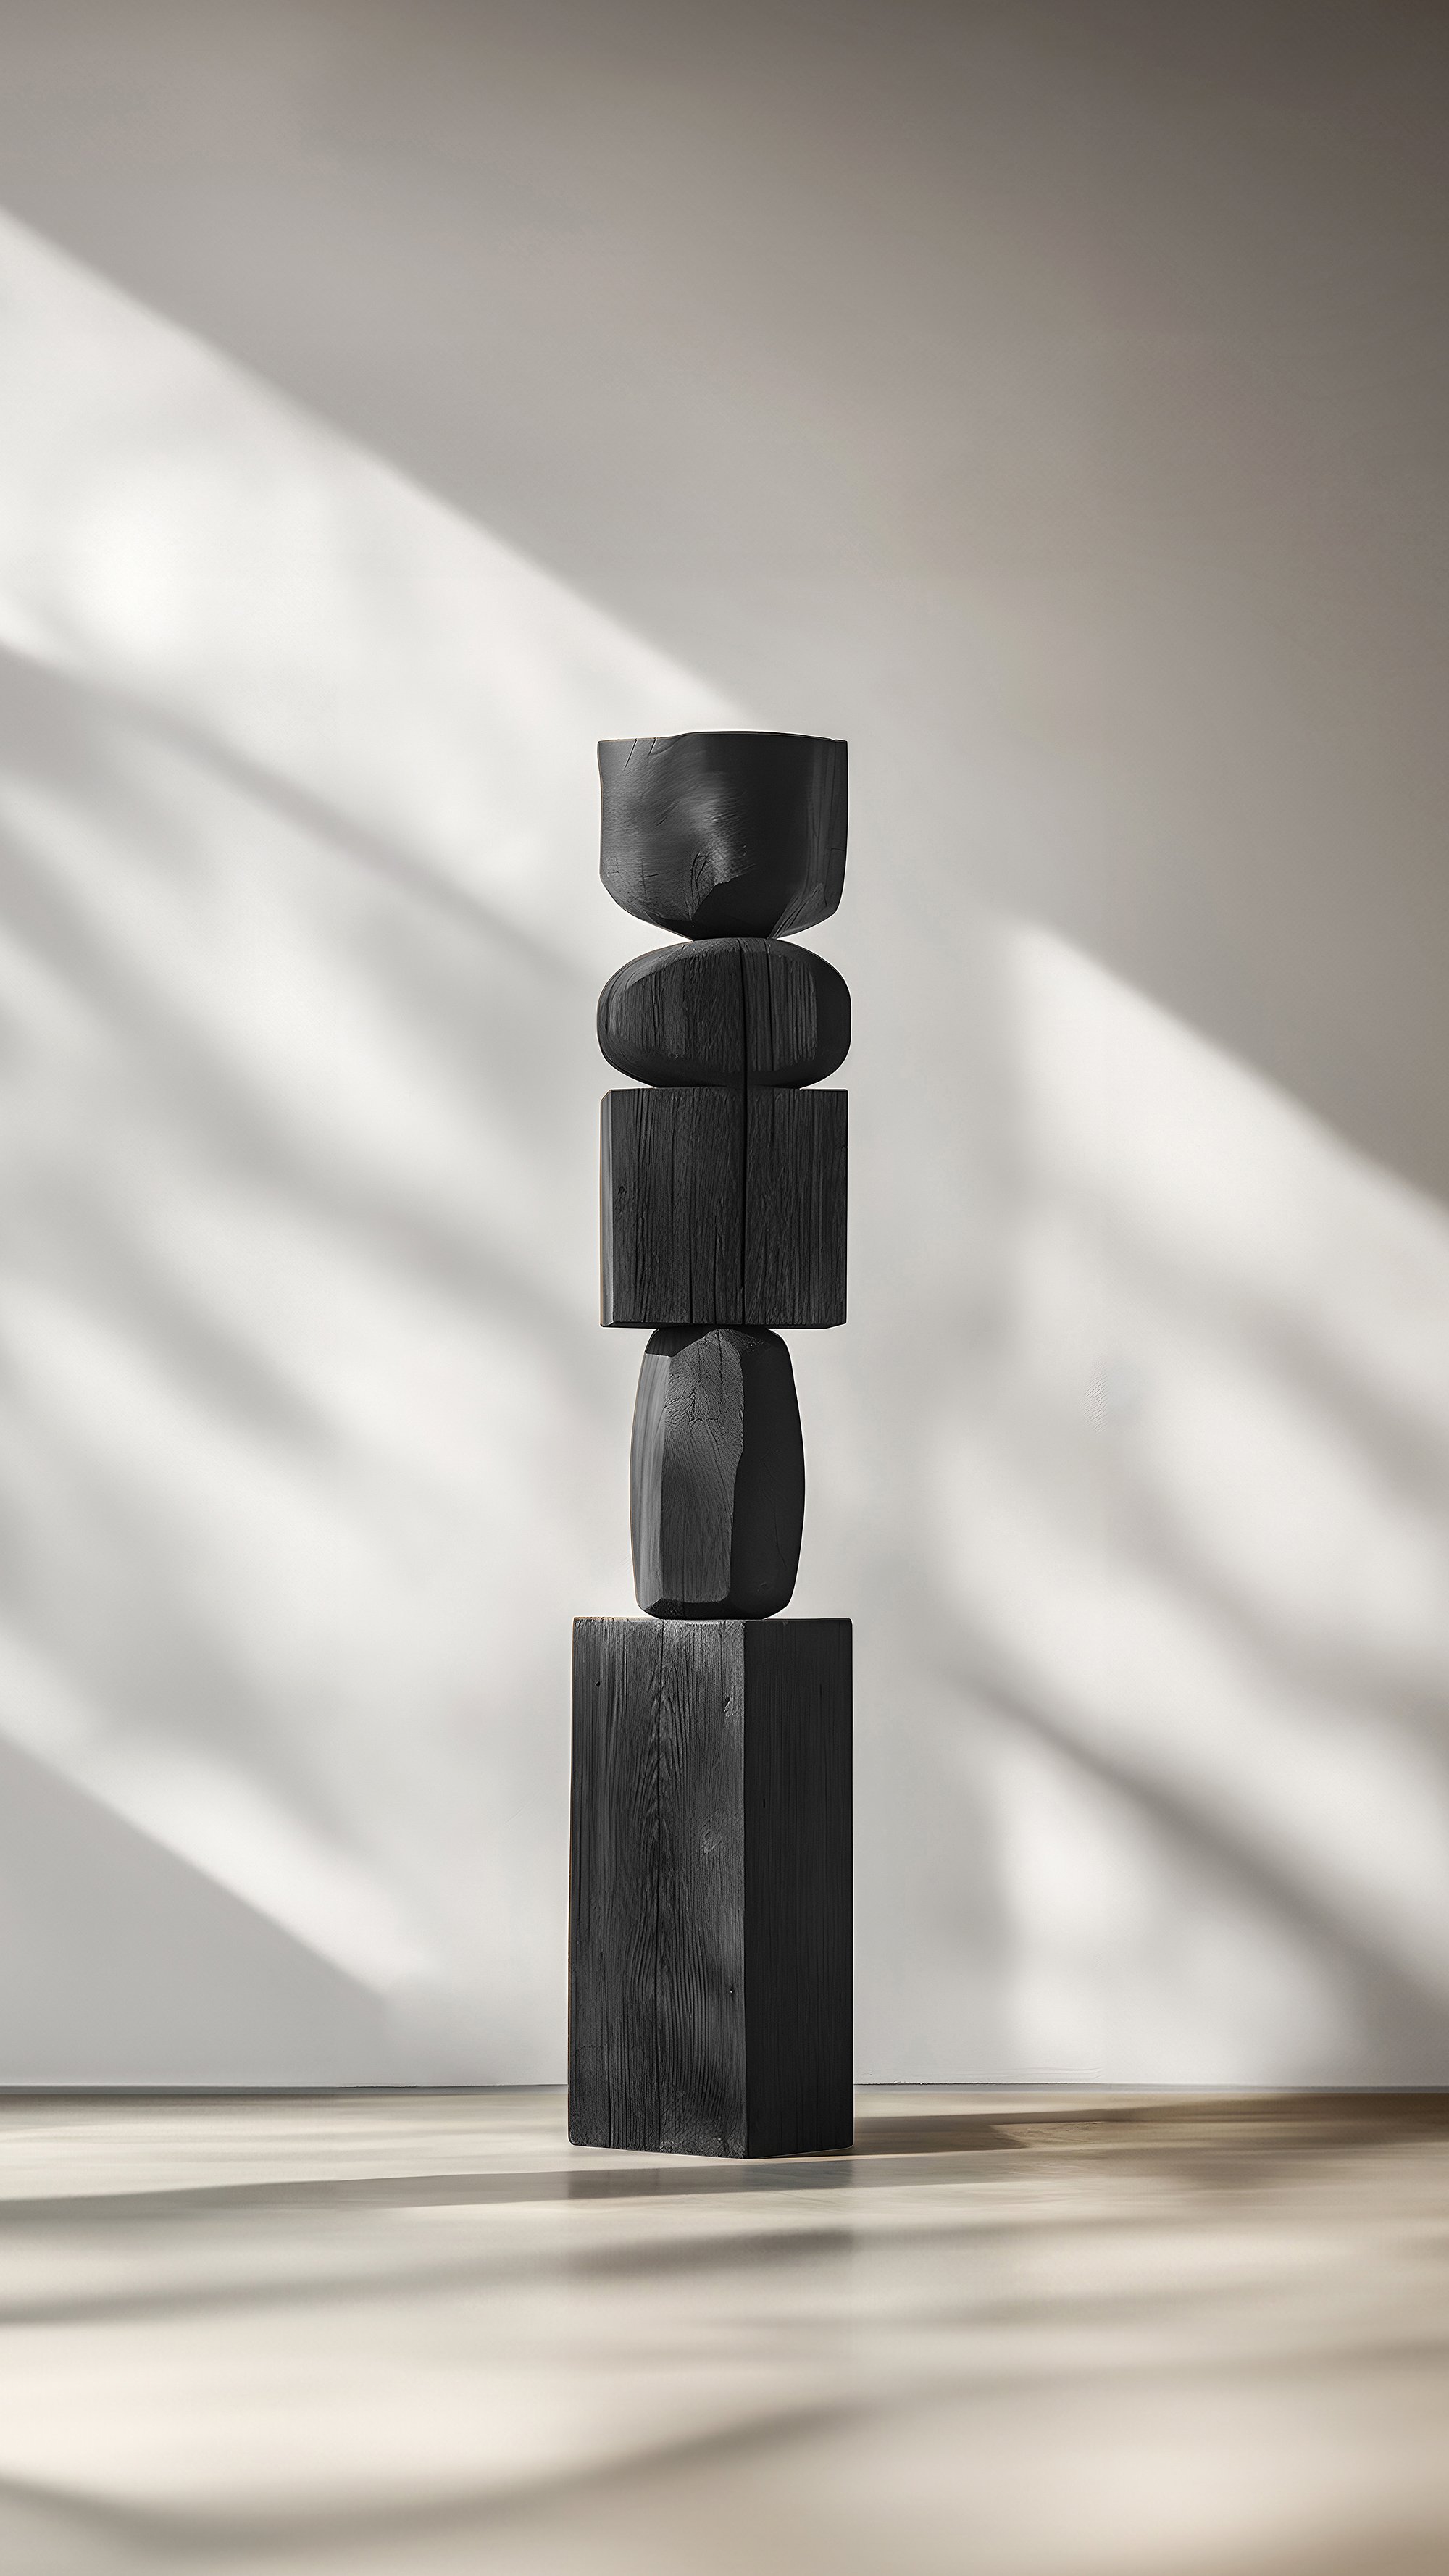 Escalona's Black Solid Wood Sculpture of Abstract Elegance, Still Stand No85 -4.jpg